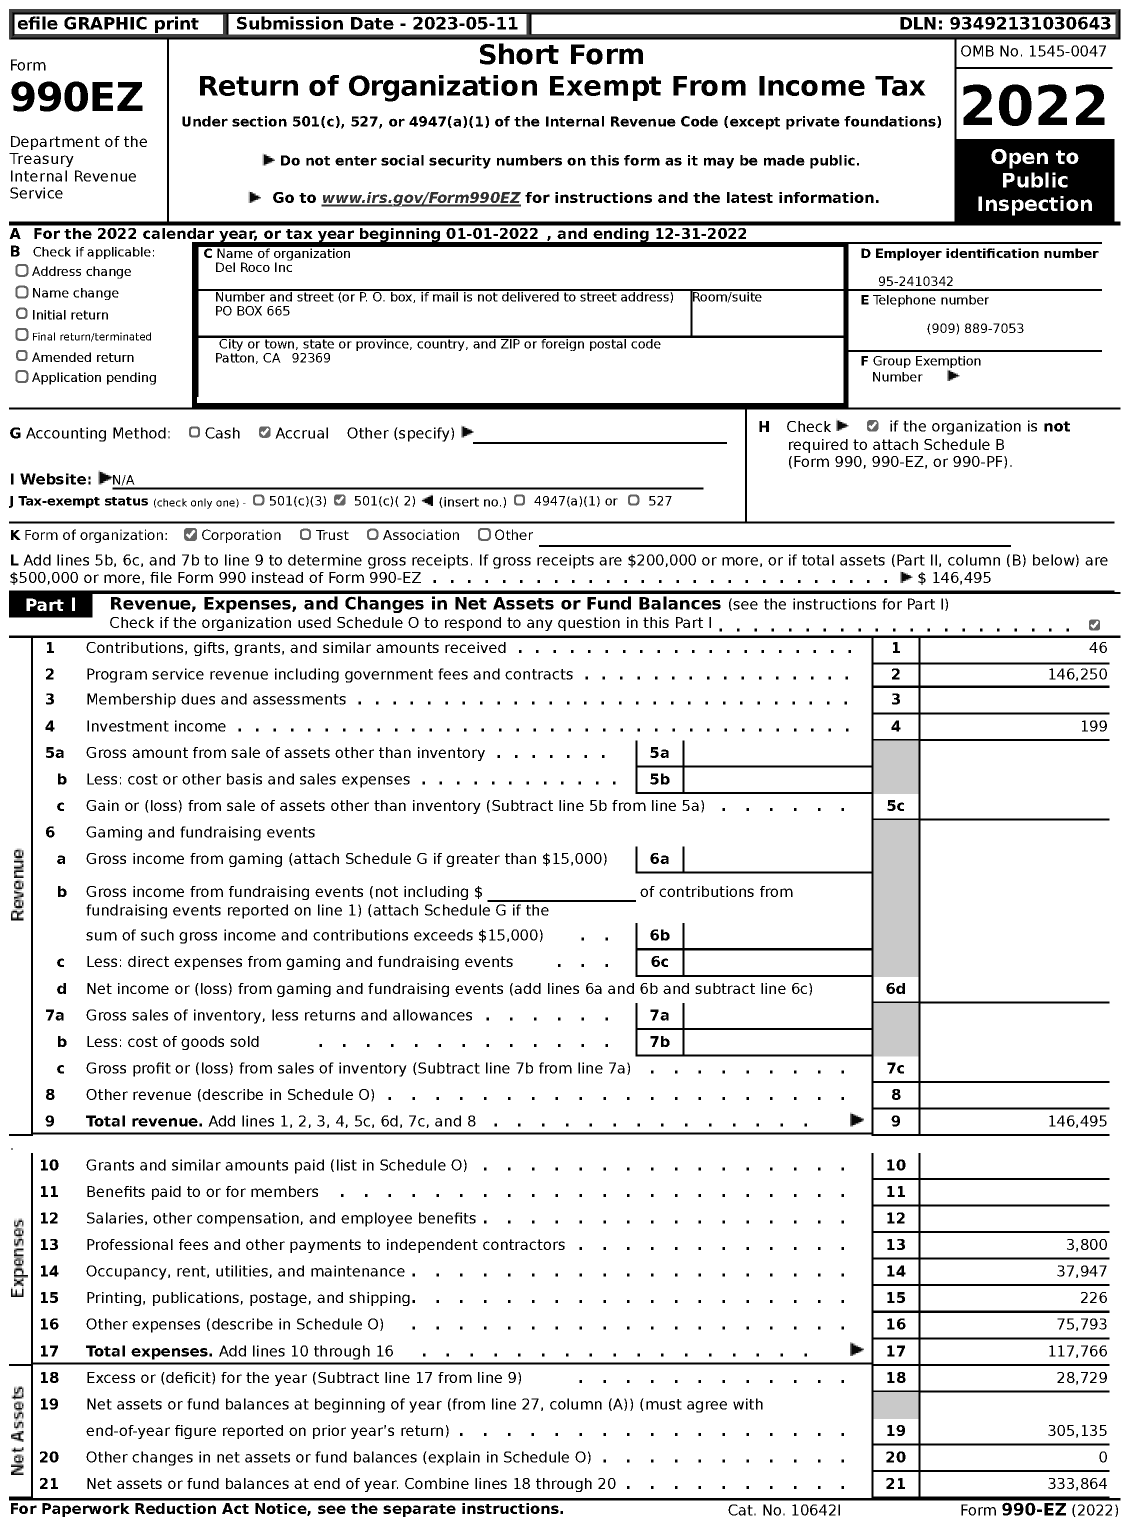 Image of first page of 2022 Form 990EZ for Del Roco